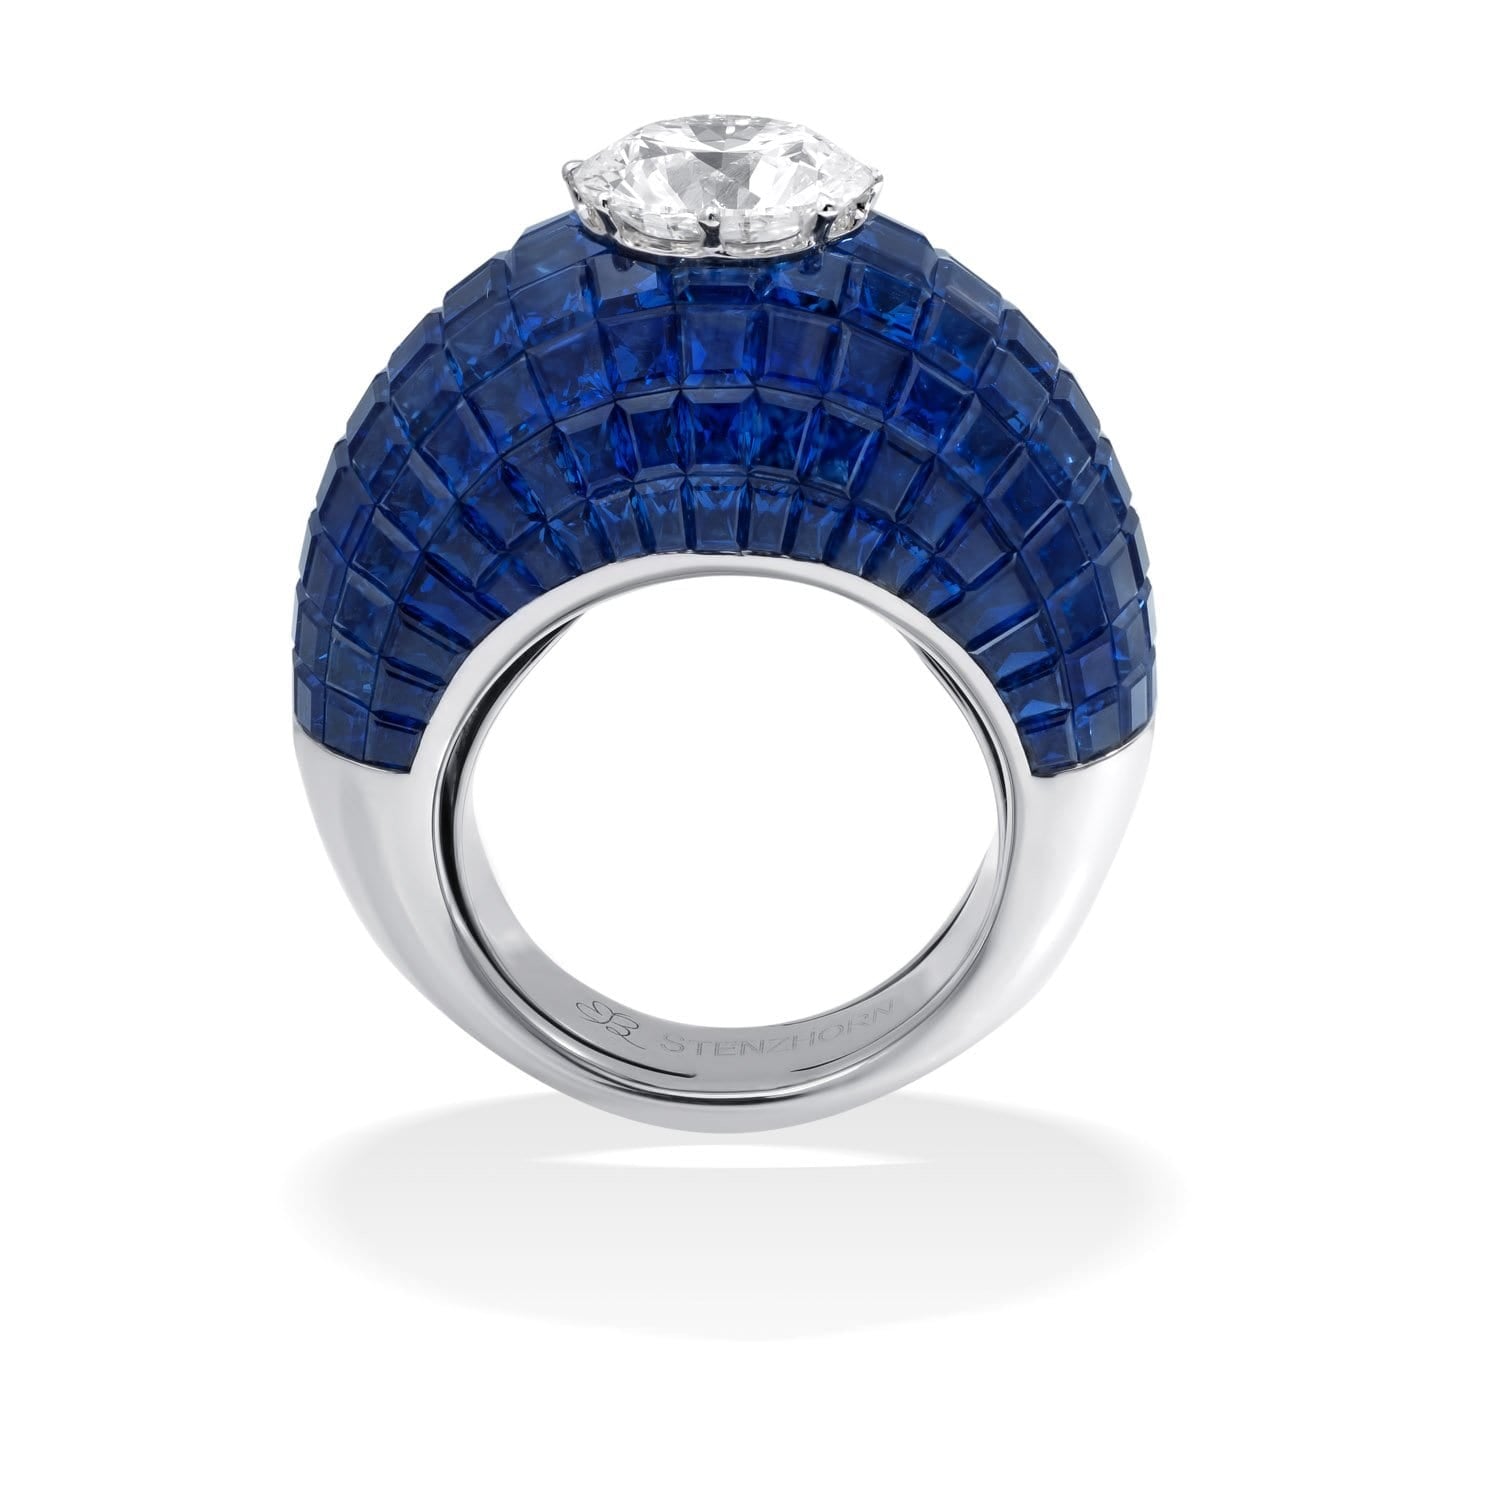 MOSAIC CLASSICAL "VELLUTO" Sapphire Dome Ring with Round Diamond Center